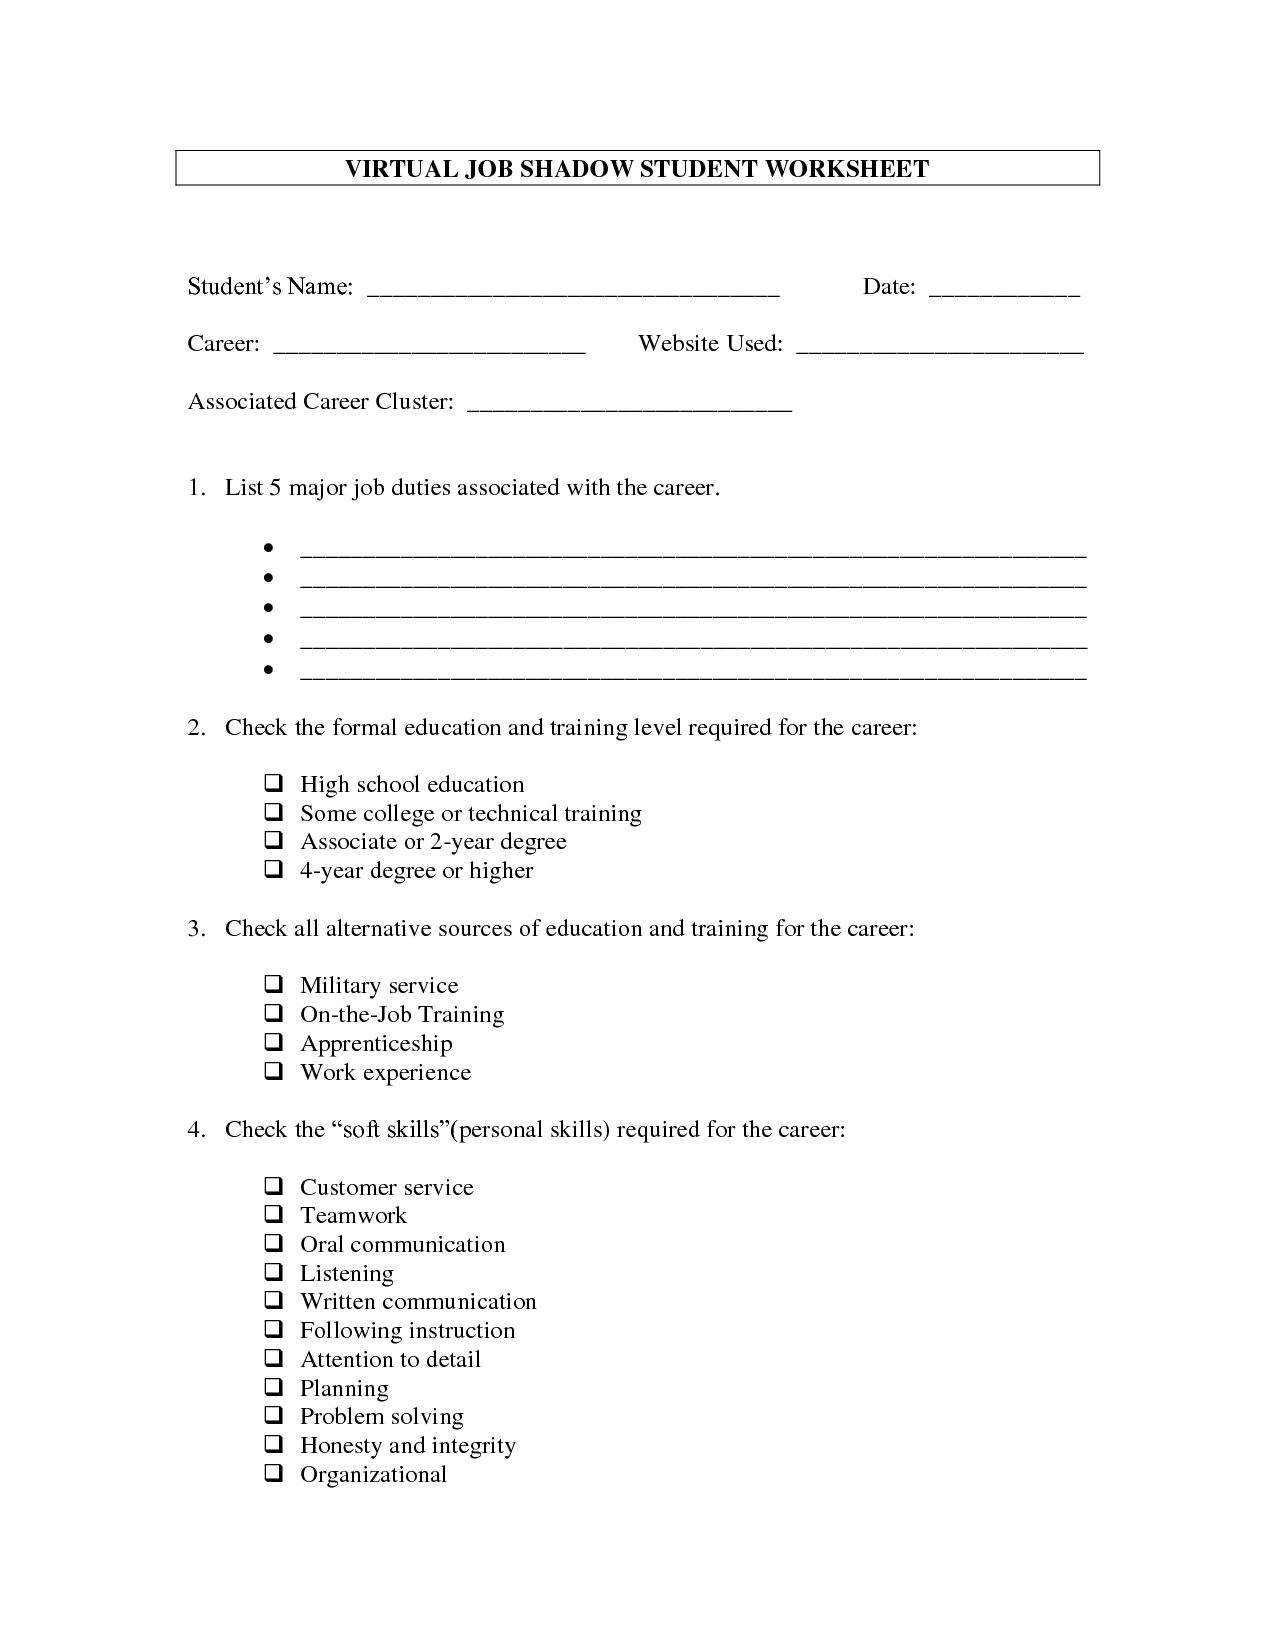 15 Best Images Of Printable Worksheets For High School Students High 